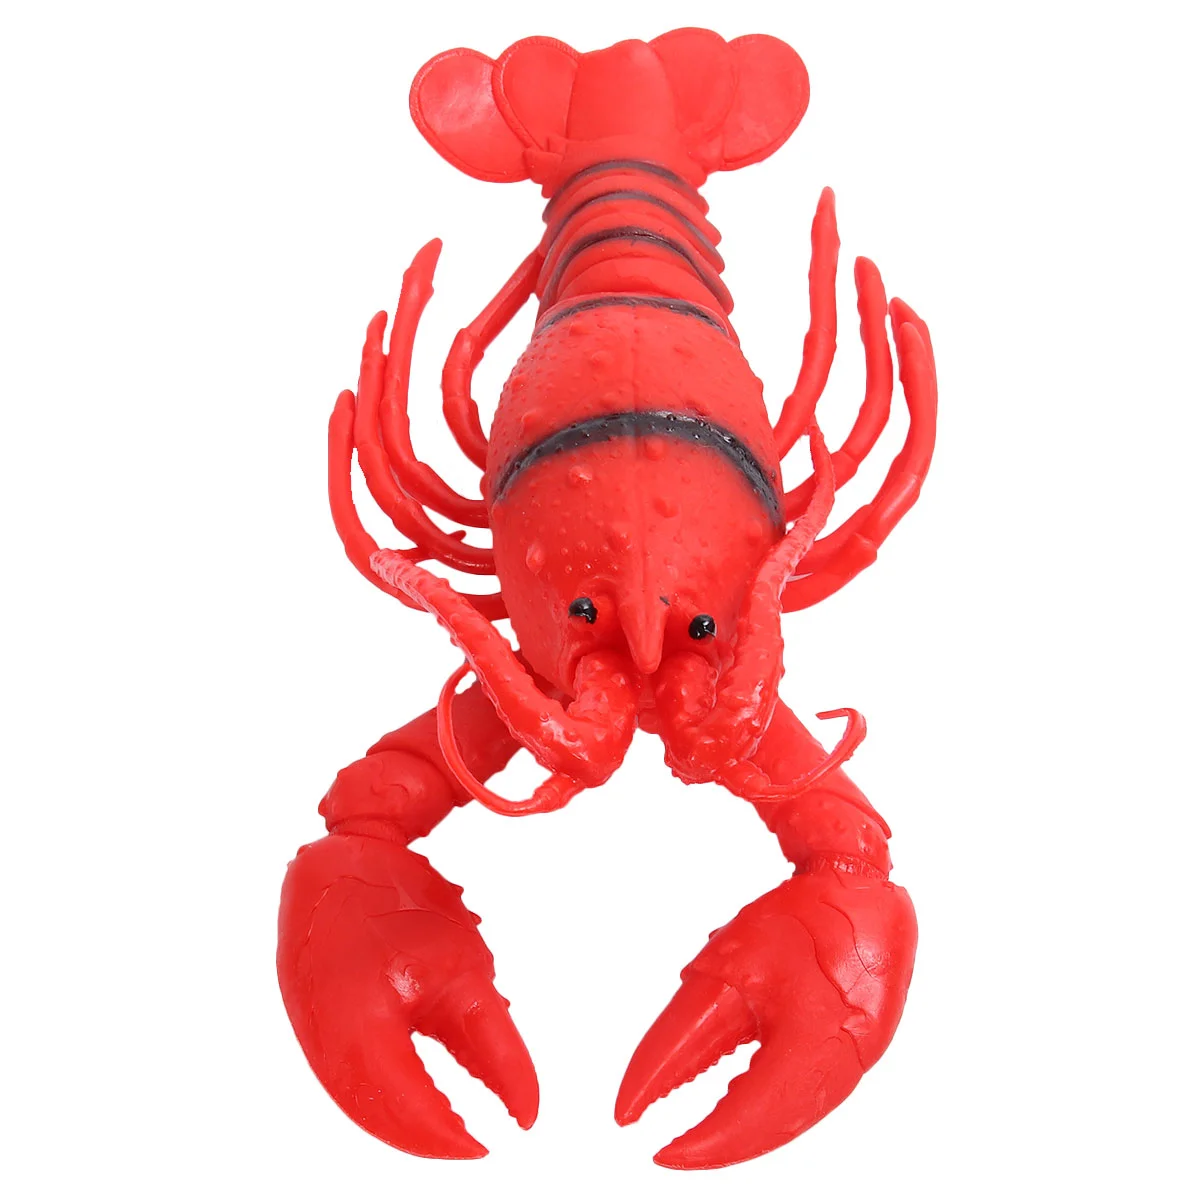 

Bath Toys Toddlers Lobster Party Birthday Decoration Educational Lifelike Artificial Kids Rubber Octopus Soft